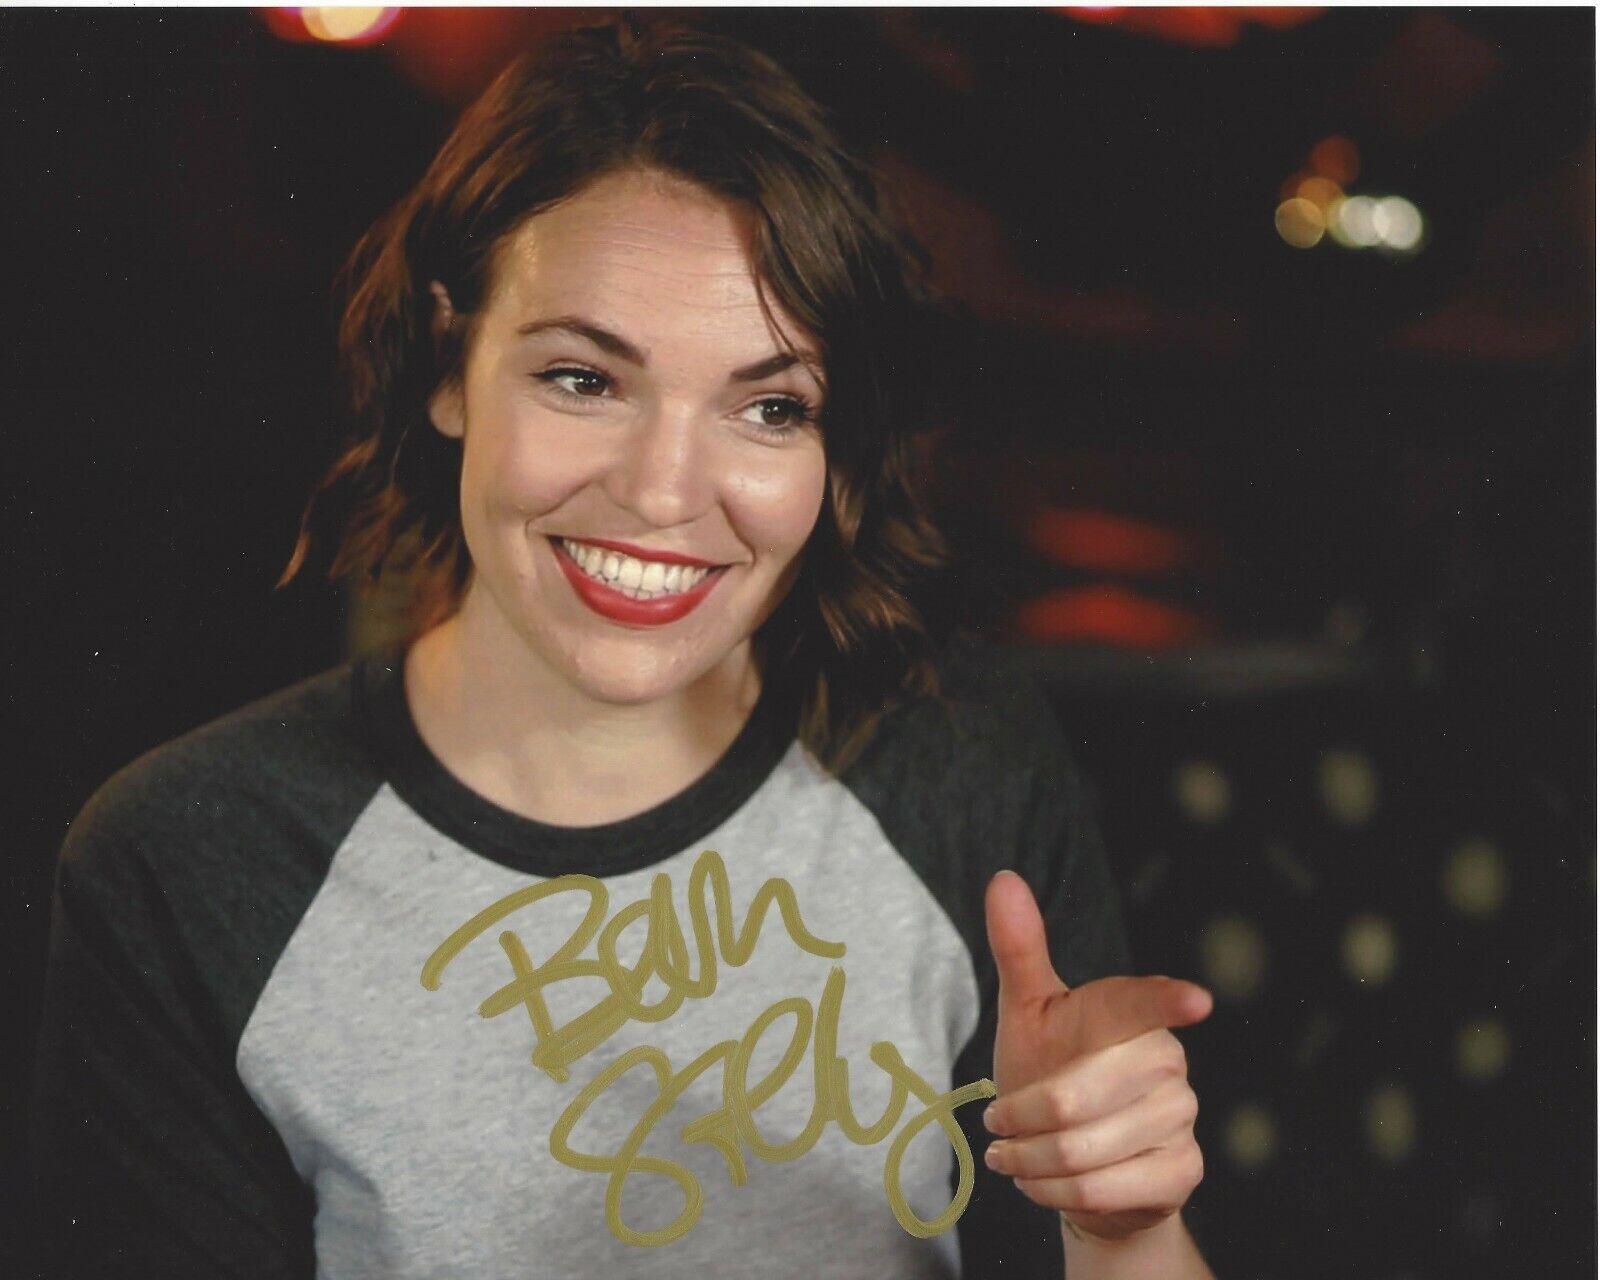 COMEDIAN BETH STELLING SIGNED 8x10 Photo Poster painting B w/COA NETFLIX THE STANDUPS LIVE